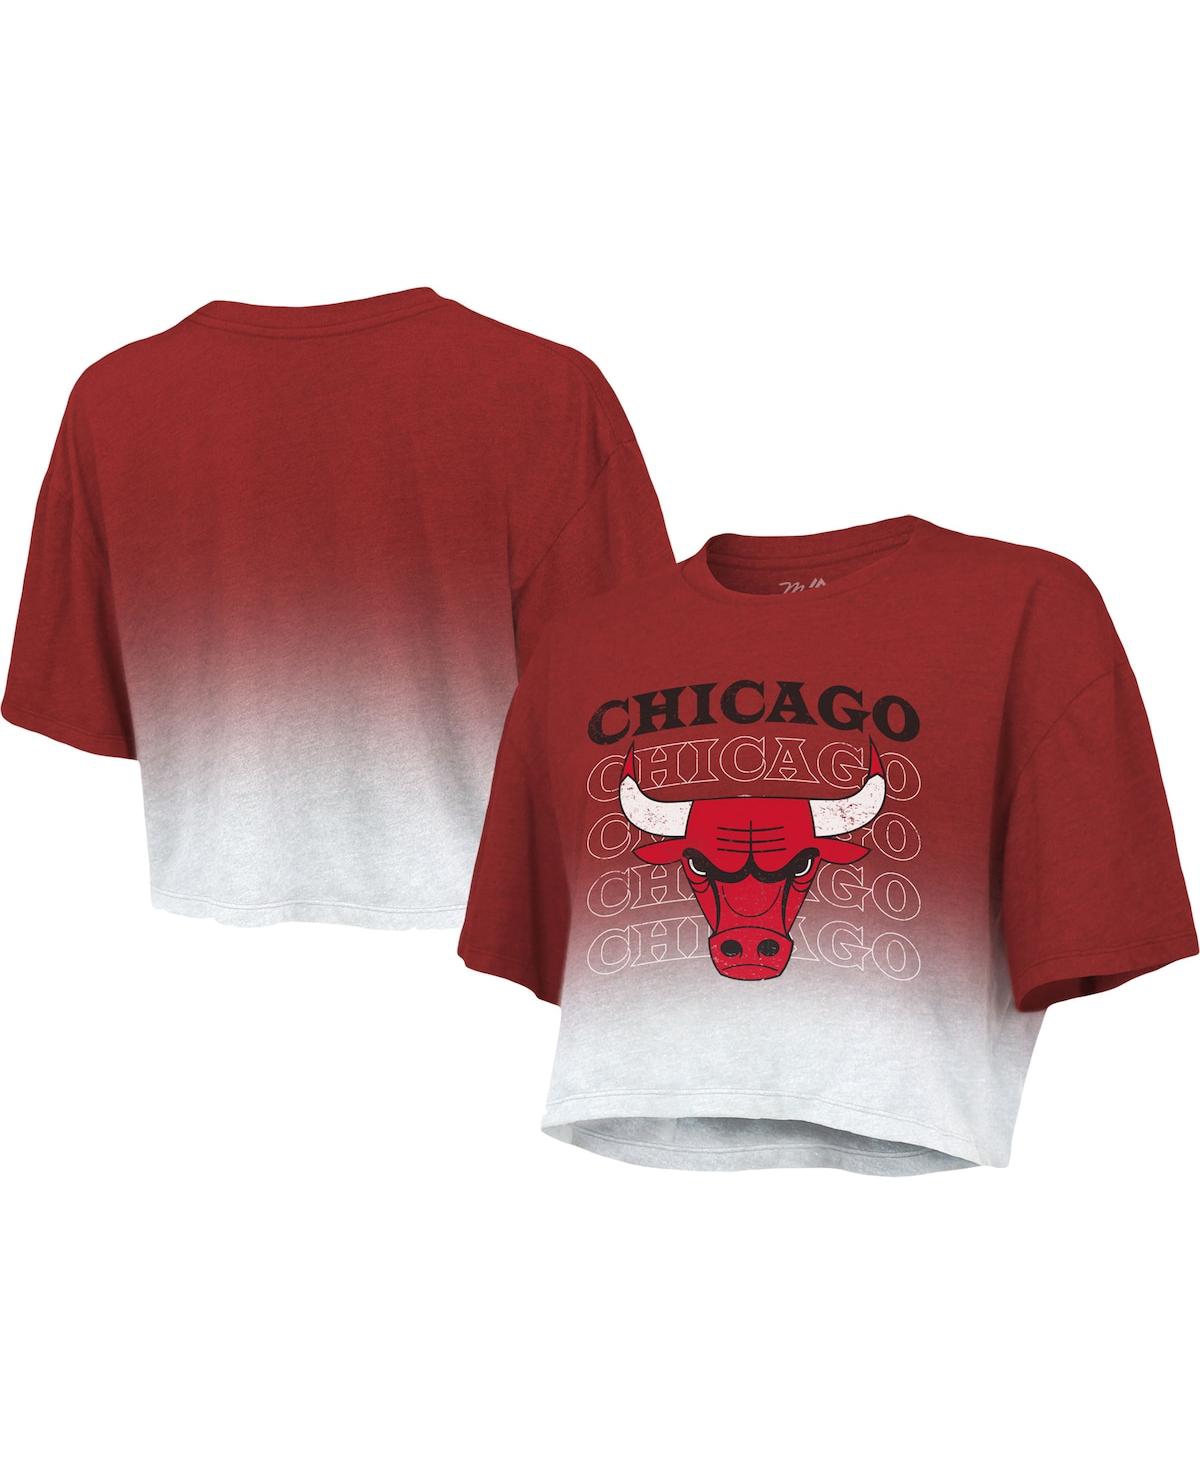 Women's Majestic Threads Red and White Chicago Bulls Repeat Dip-Dye Cropped T-shirt - Red, White